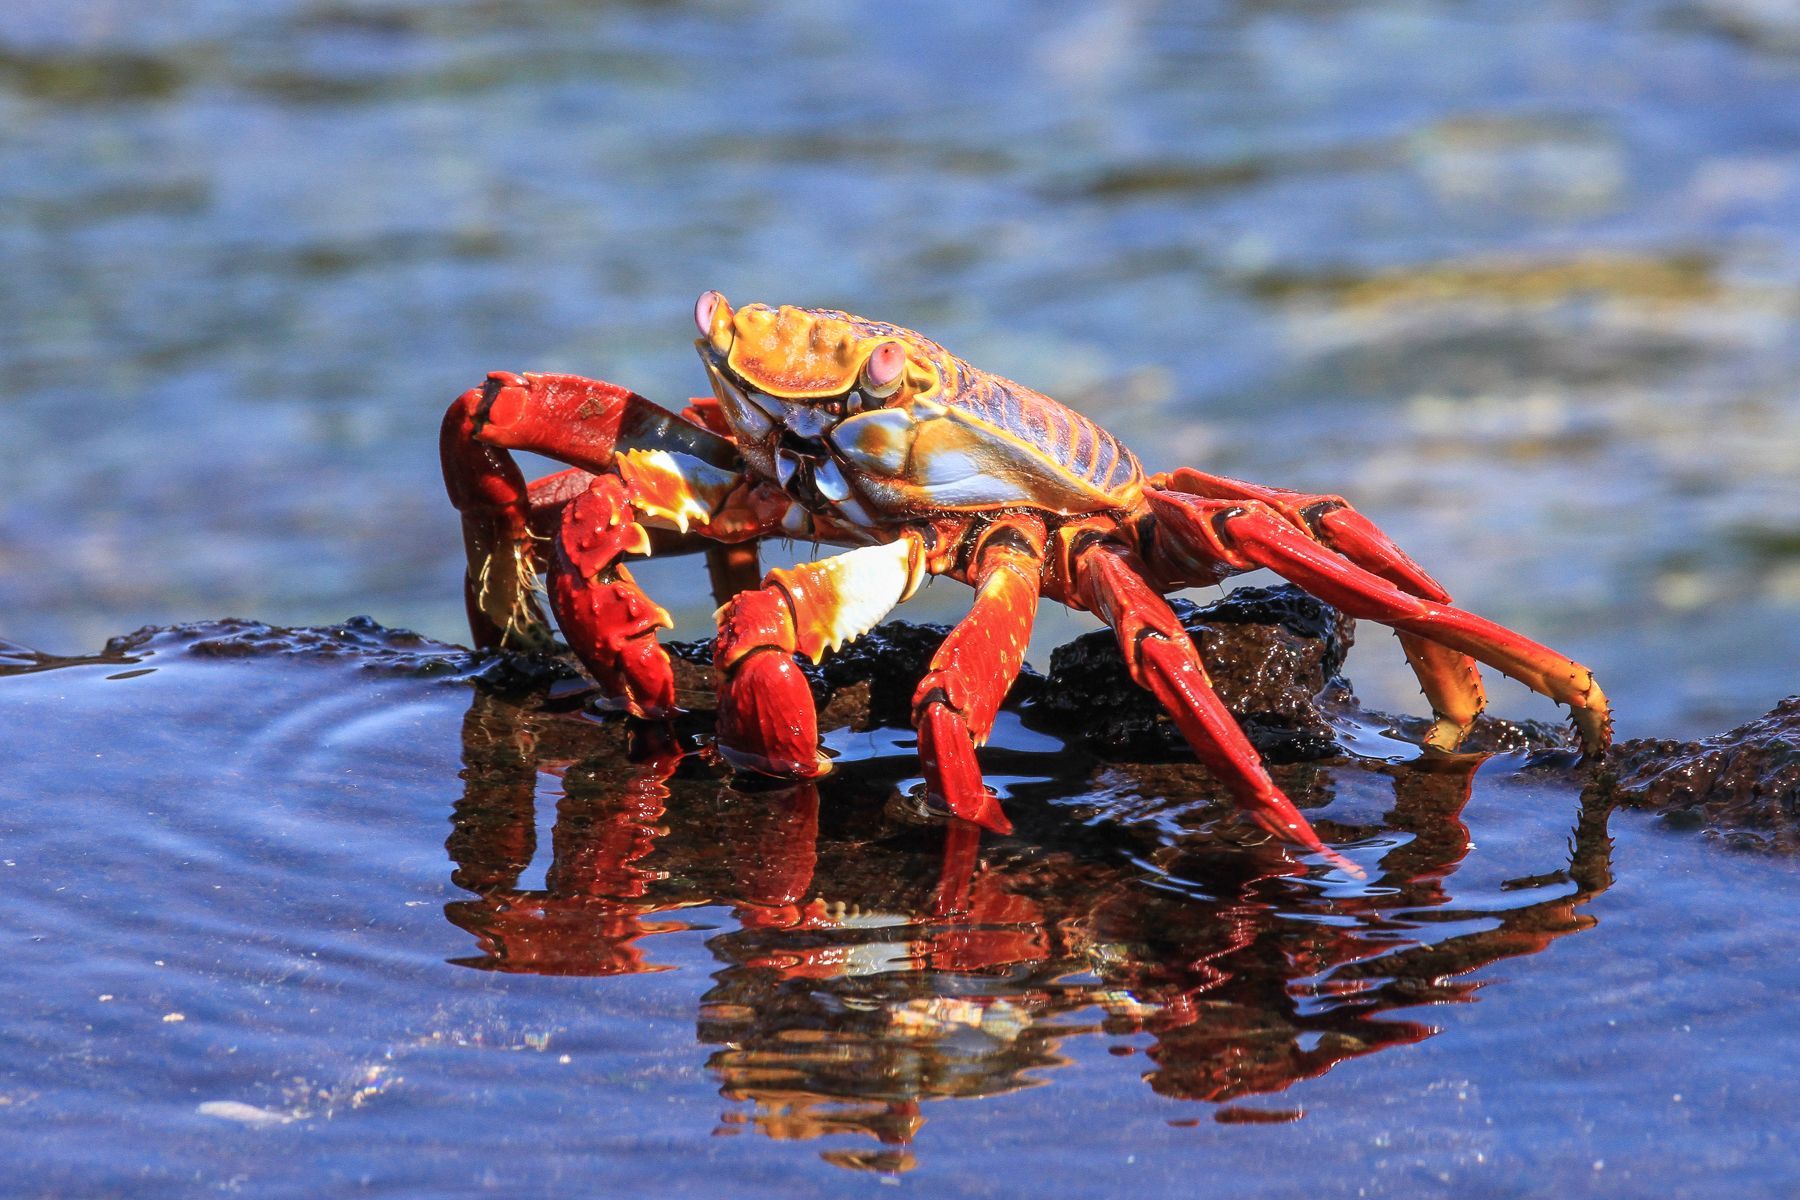 While colourful Sally Lightfoot Crabs scurry about the rock pools